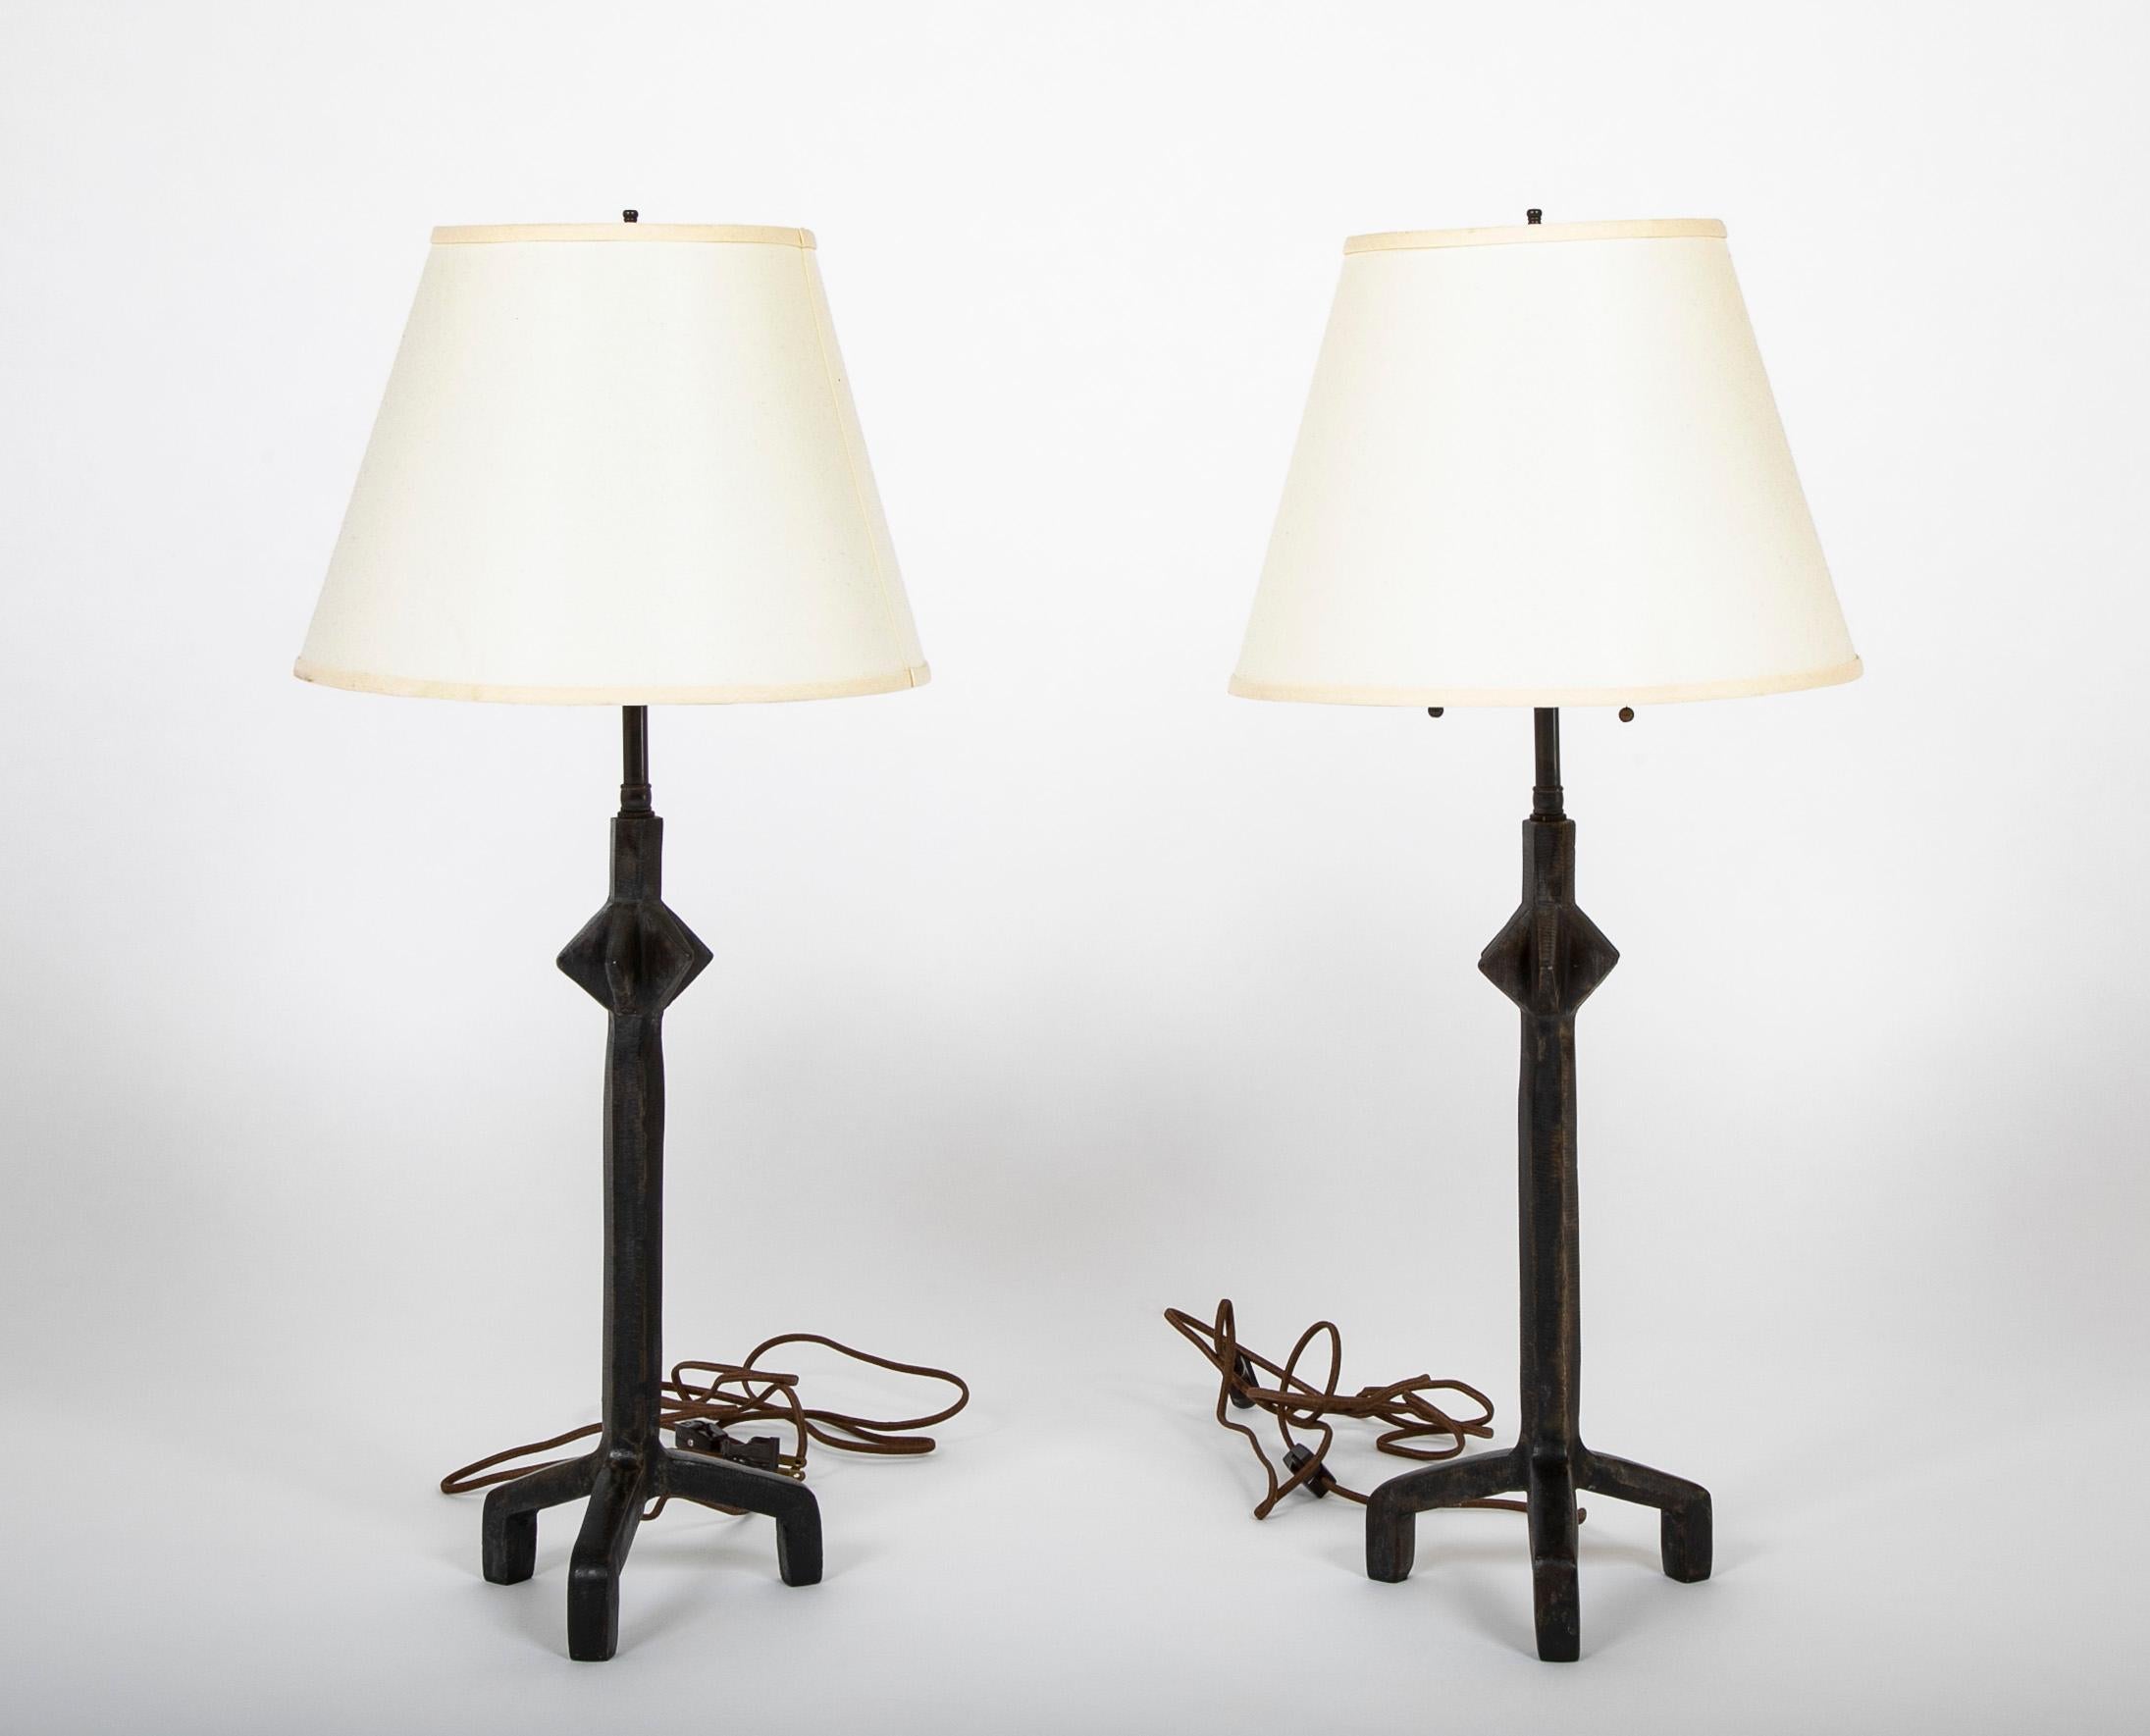 Pair of patinated bronze ‘Modèle Etoile’ lamps, after Giacometti. Note : Modèle Etoile table lamps were originally created by Giacometti for renowned interior designer Jean-Michel Frank circa 1935-1936. Crafted since. Circa 1960's.

Measures: